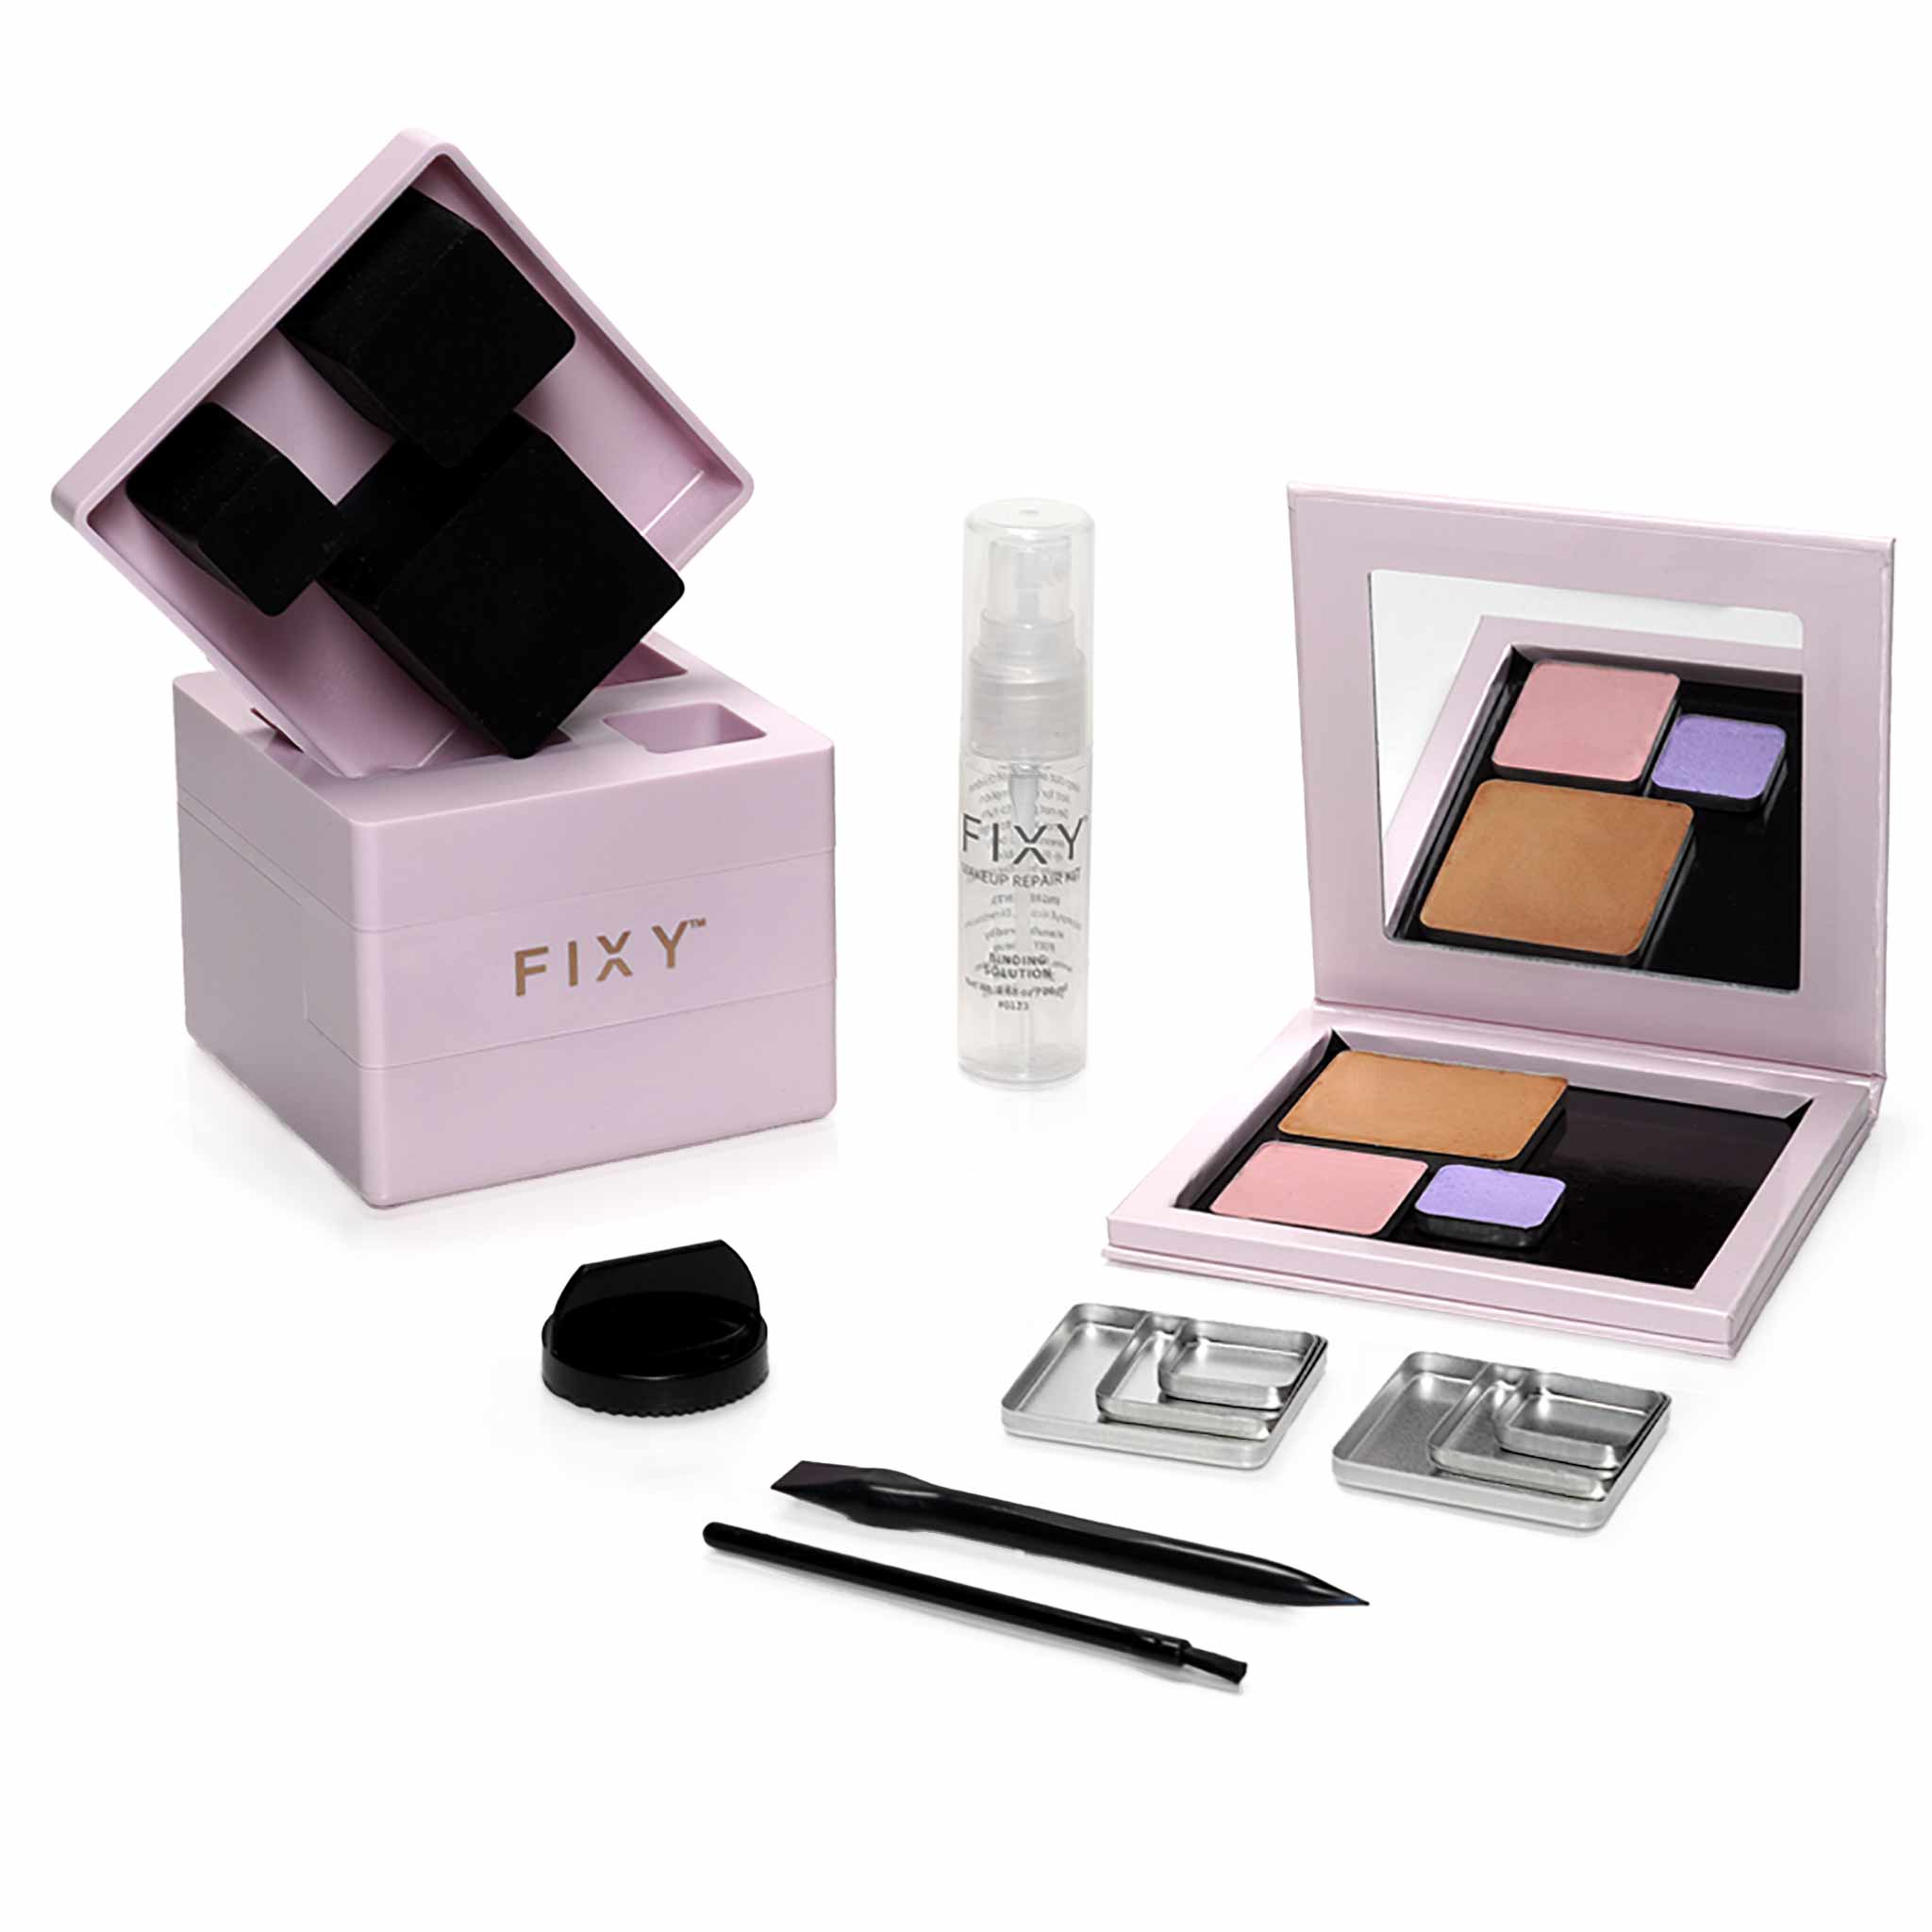 FIXY Makeup Repressing Kit (for Square Pans) LAUNCHING 3/23